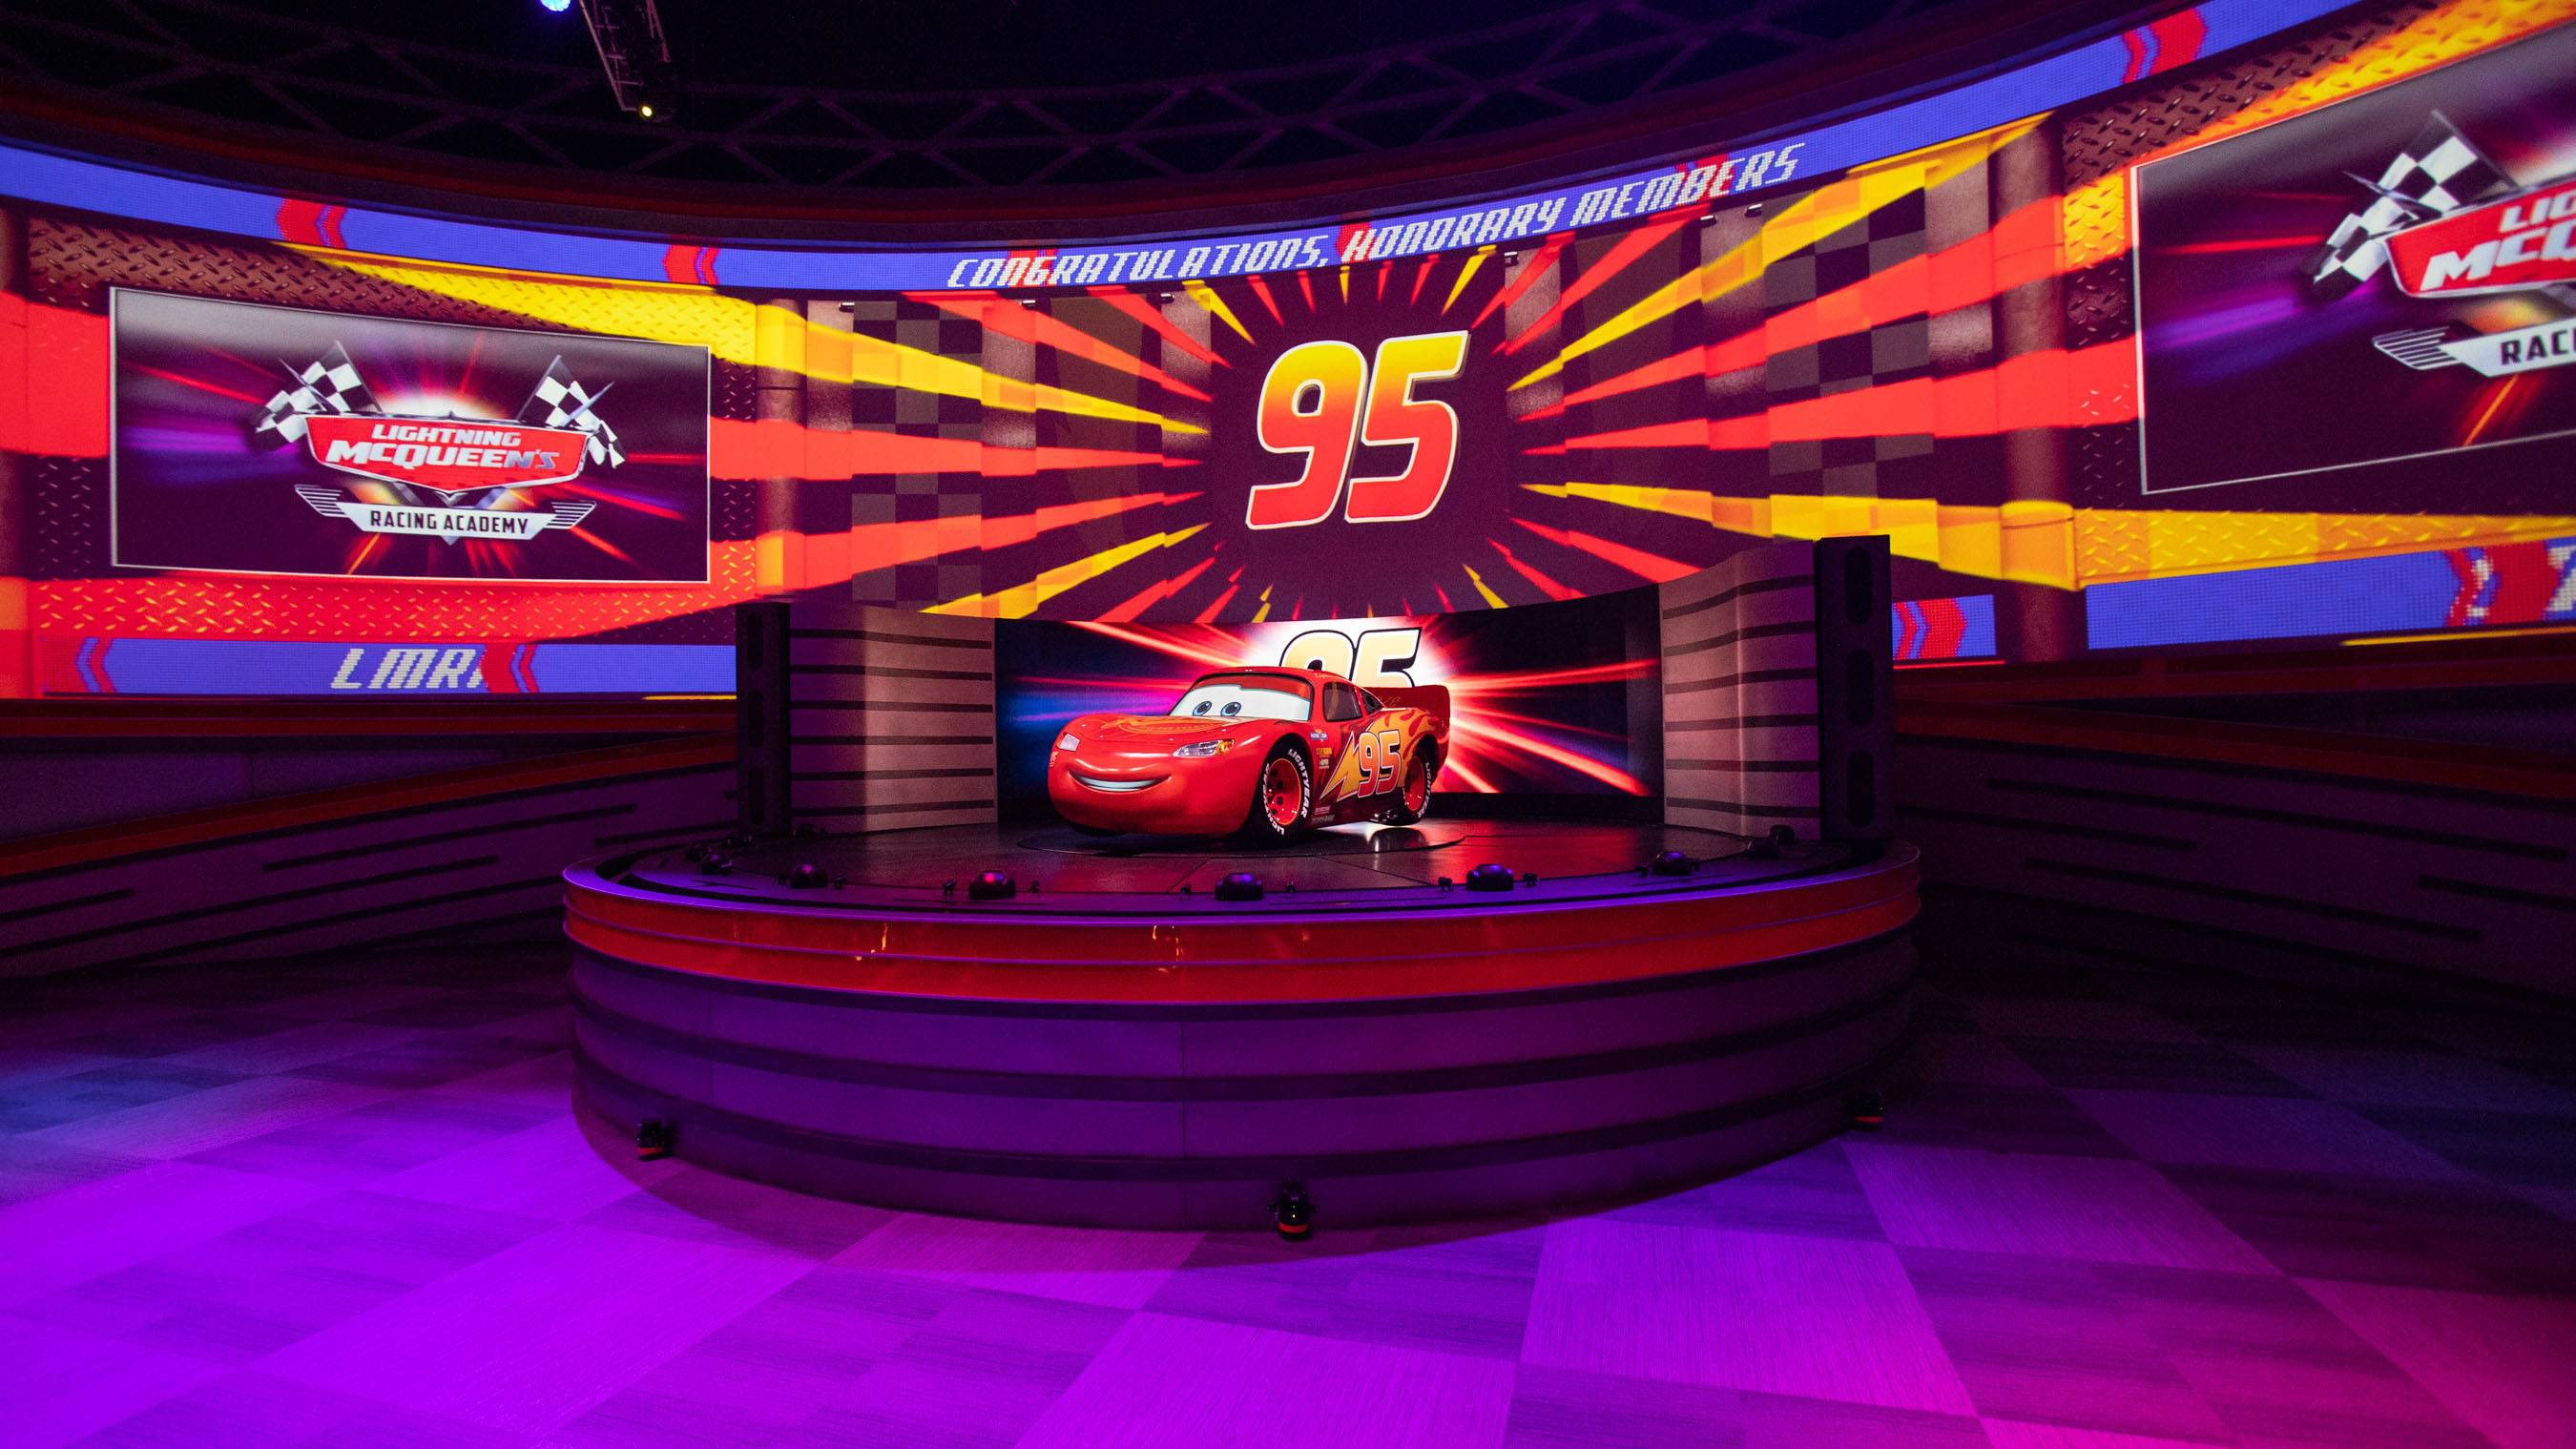 Lightning McQueen's Racing Academy Reopens After Unexpected Week-Long  Closure at Disney's Hollywood Studios - WDW News Today